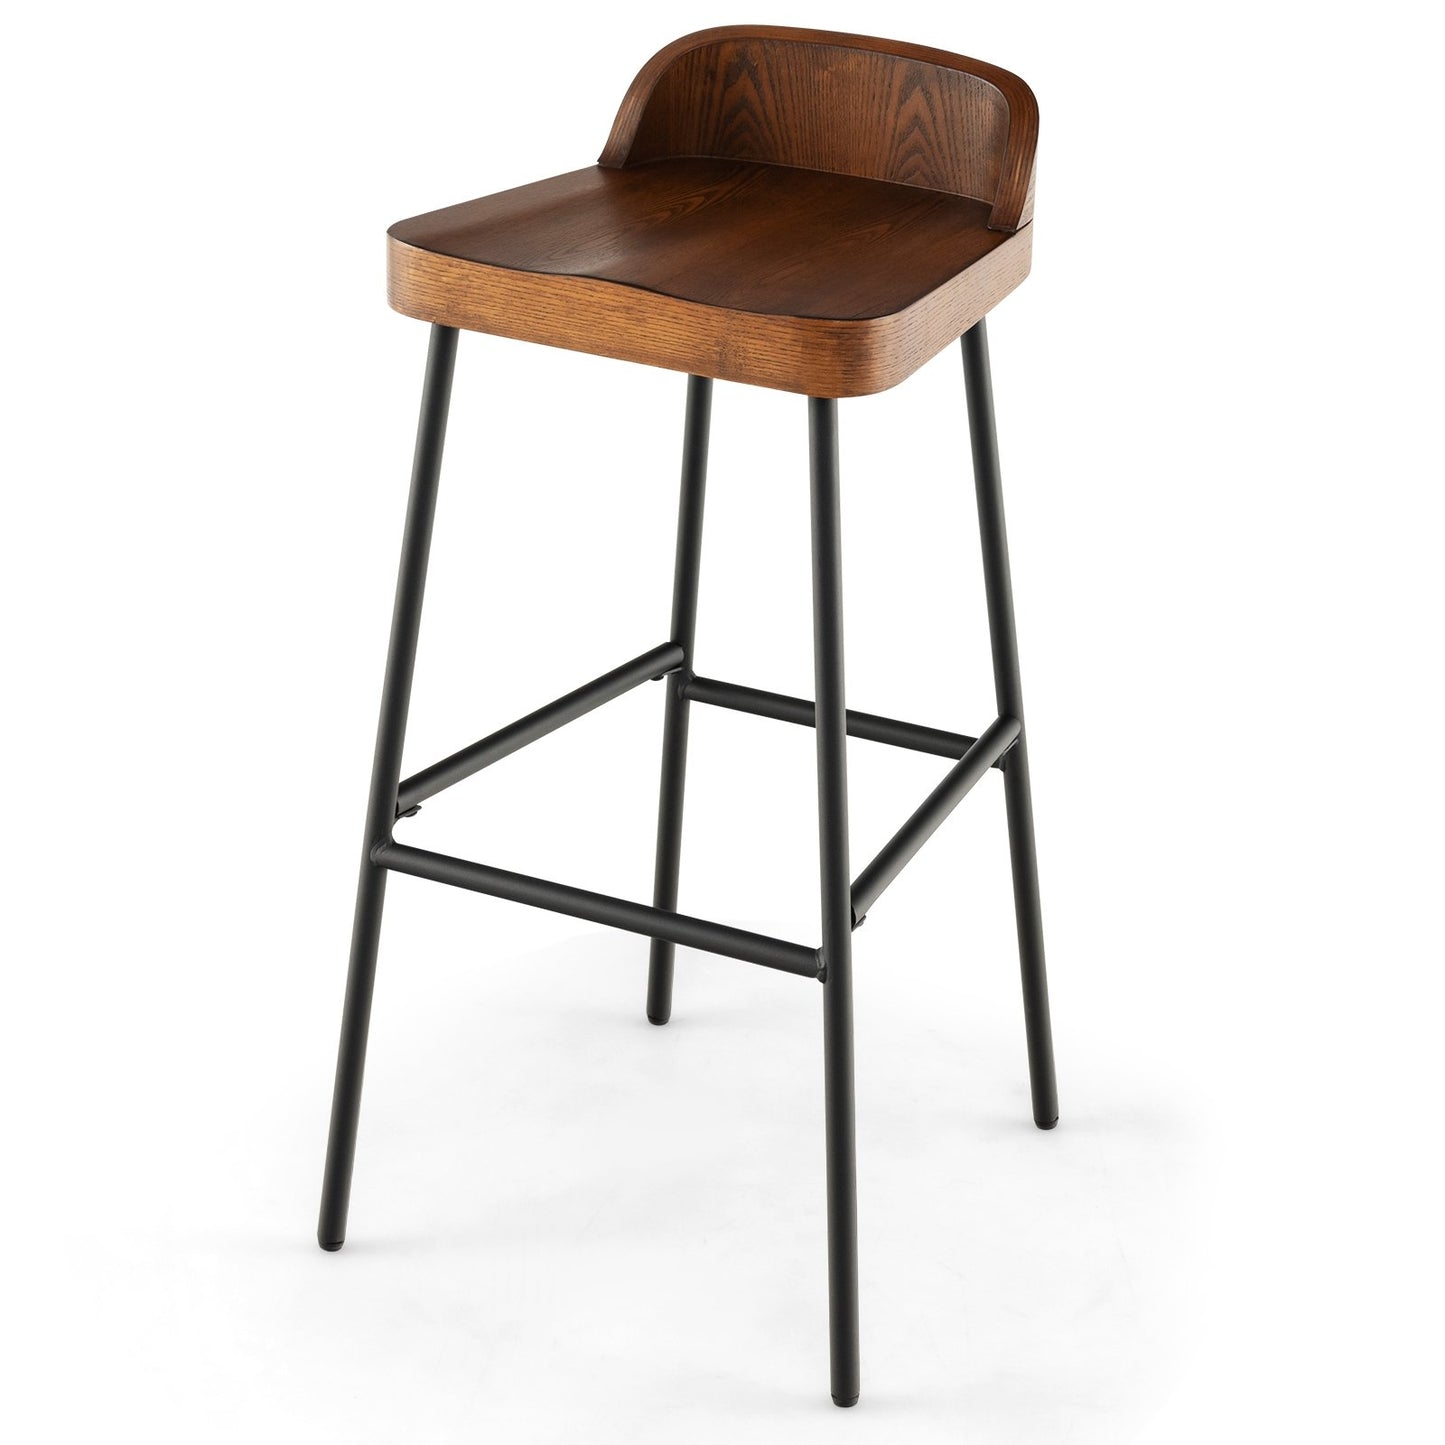 Set of 1/2 29 Inch Industrial Bar Stools with Low Back and Footrests-1 Piece, Rustic Brown